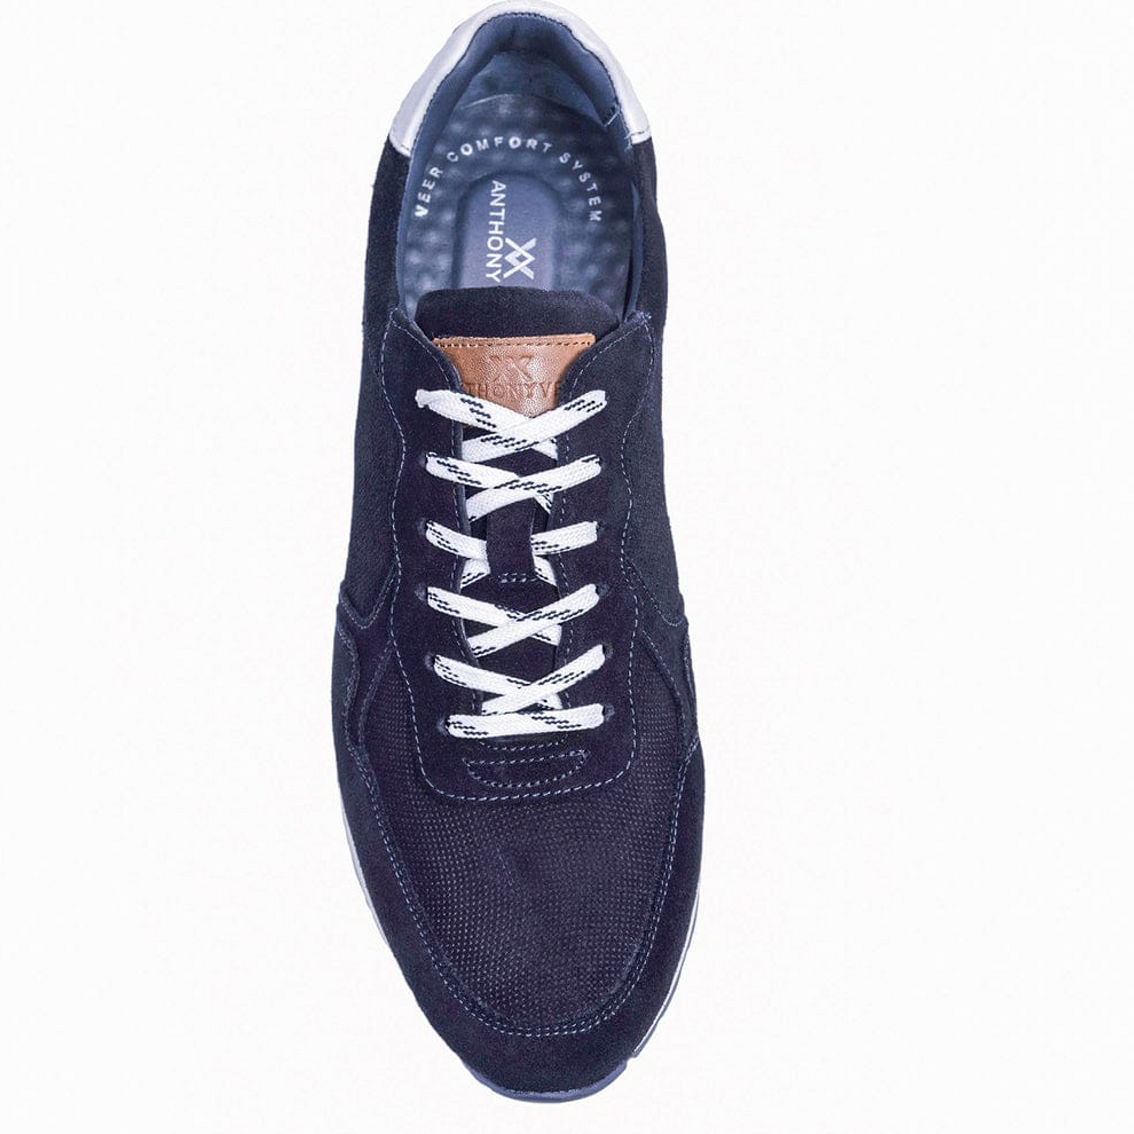 Anthony Veer Mens West Lace-up Sneaker Shoe - Image 3 of 5